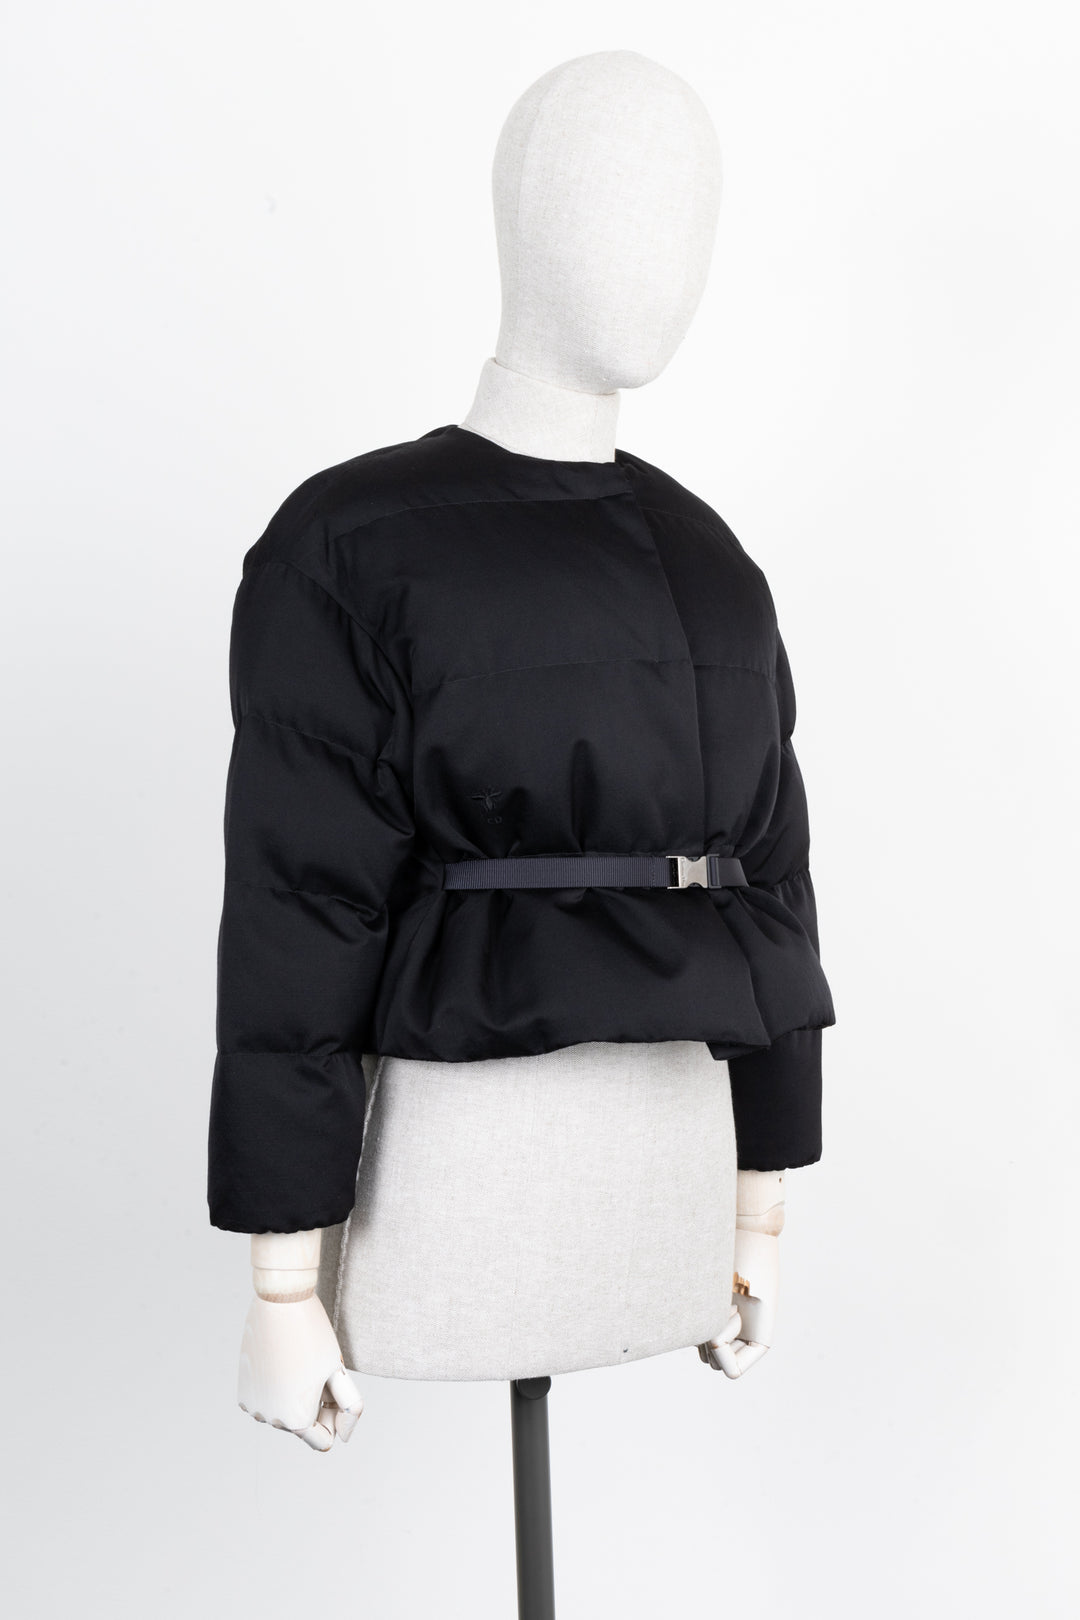 CHRISTIAN DIOR ALPS Puffer Jacket with Belt Black